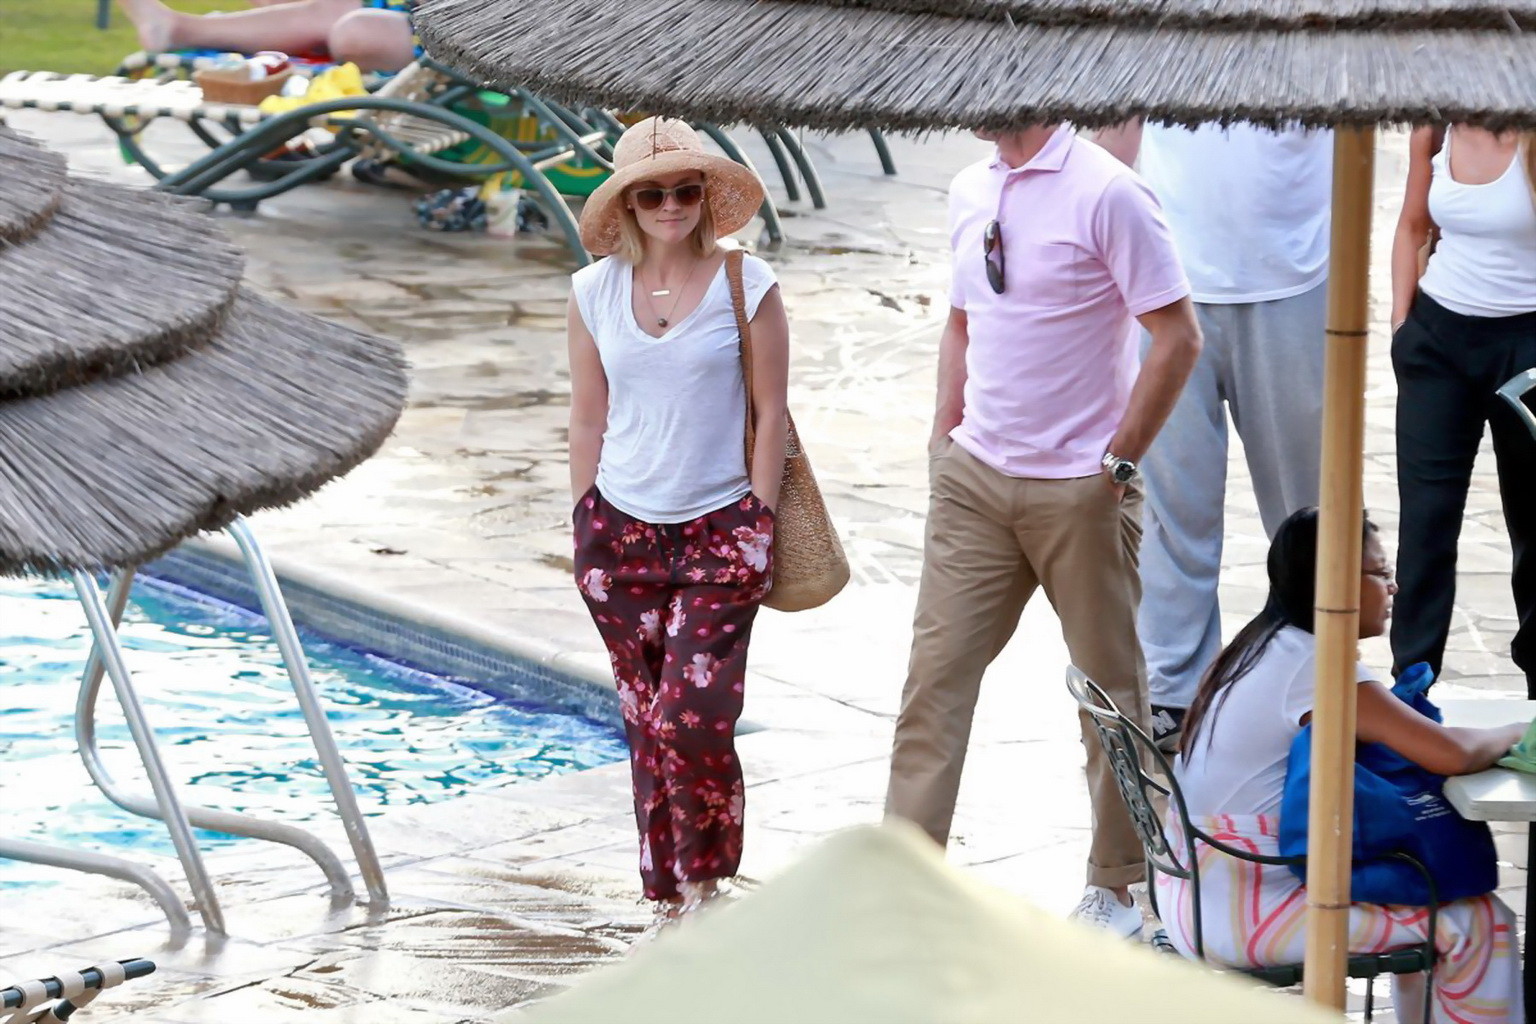 Reese Witherspoon tanning in skimpy pink tube bikini at her hotel in Hawaii #75208039